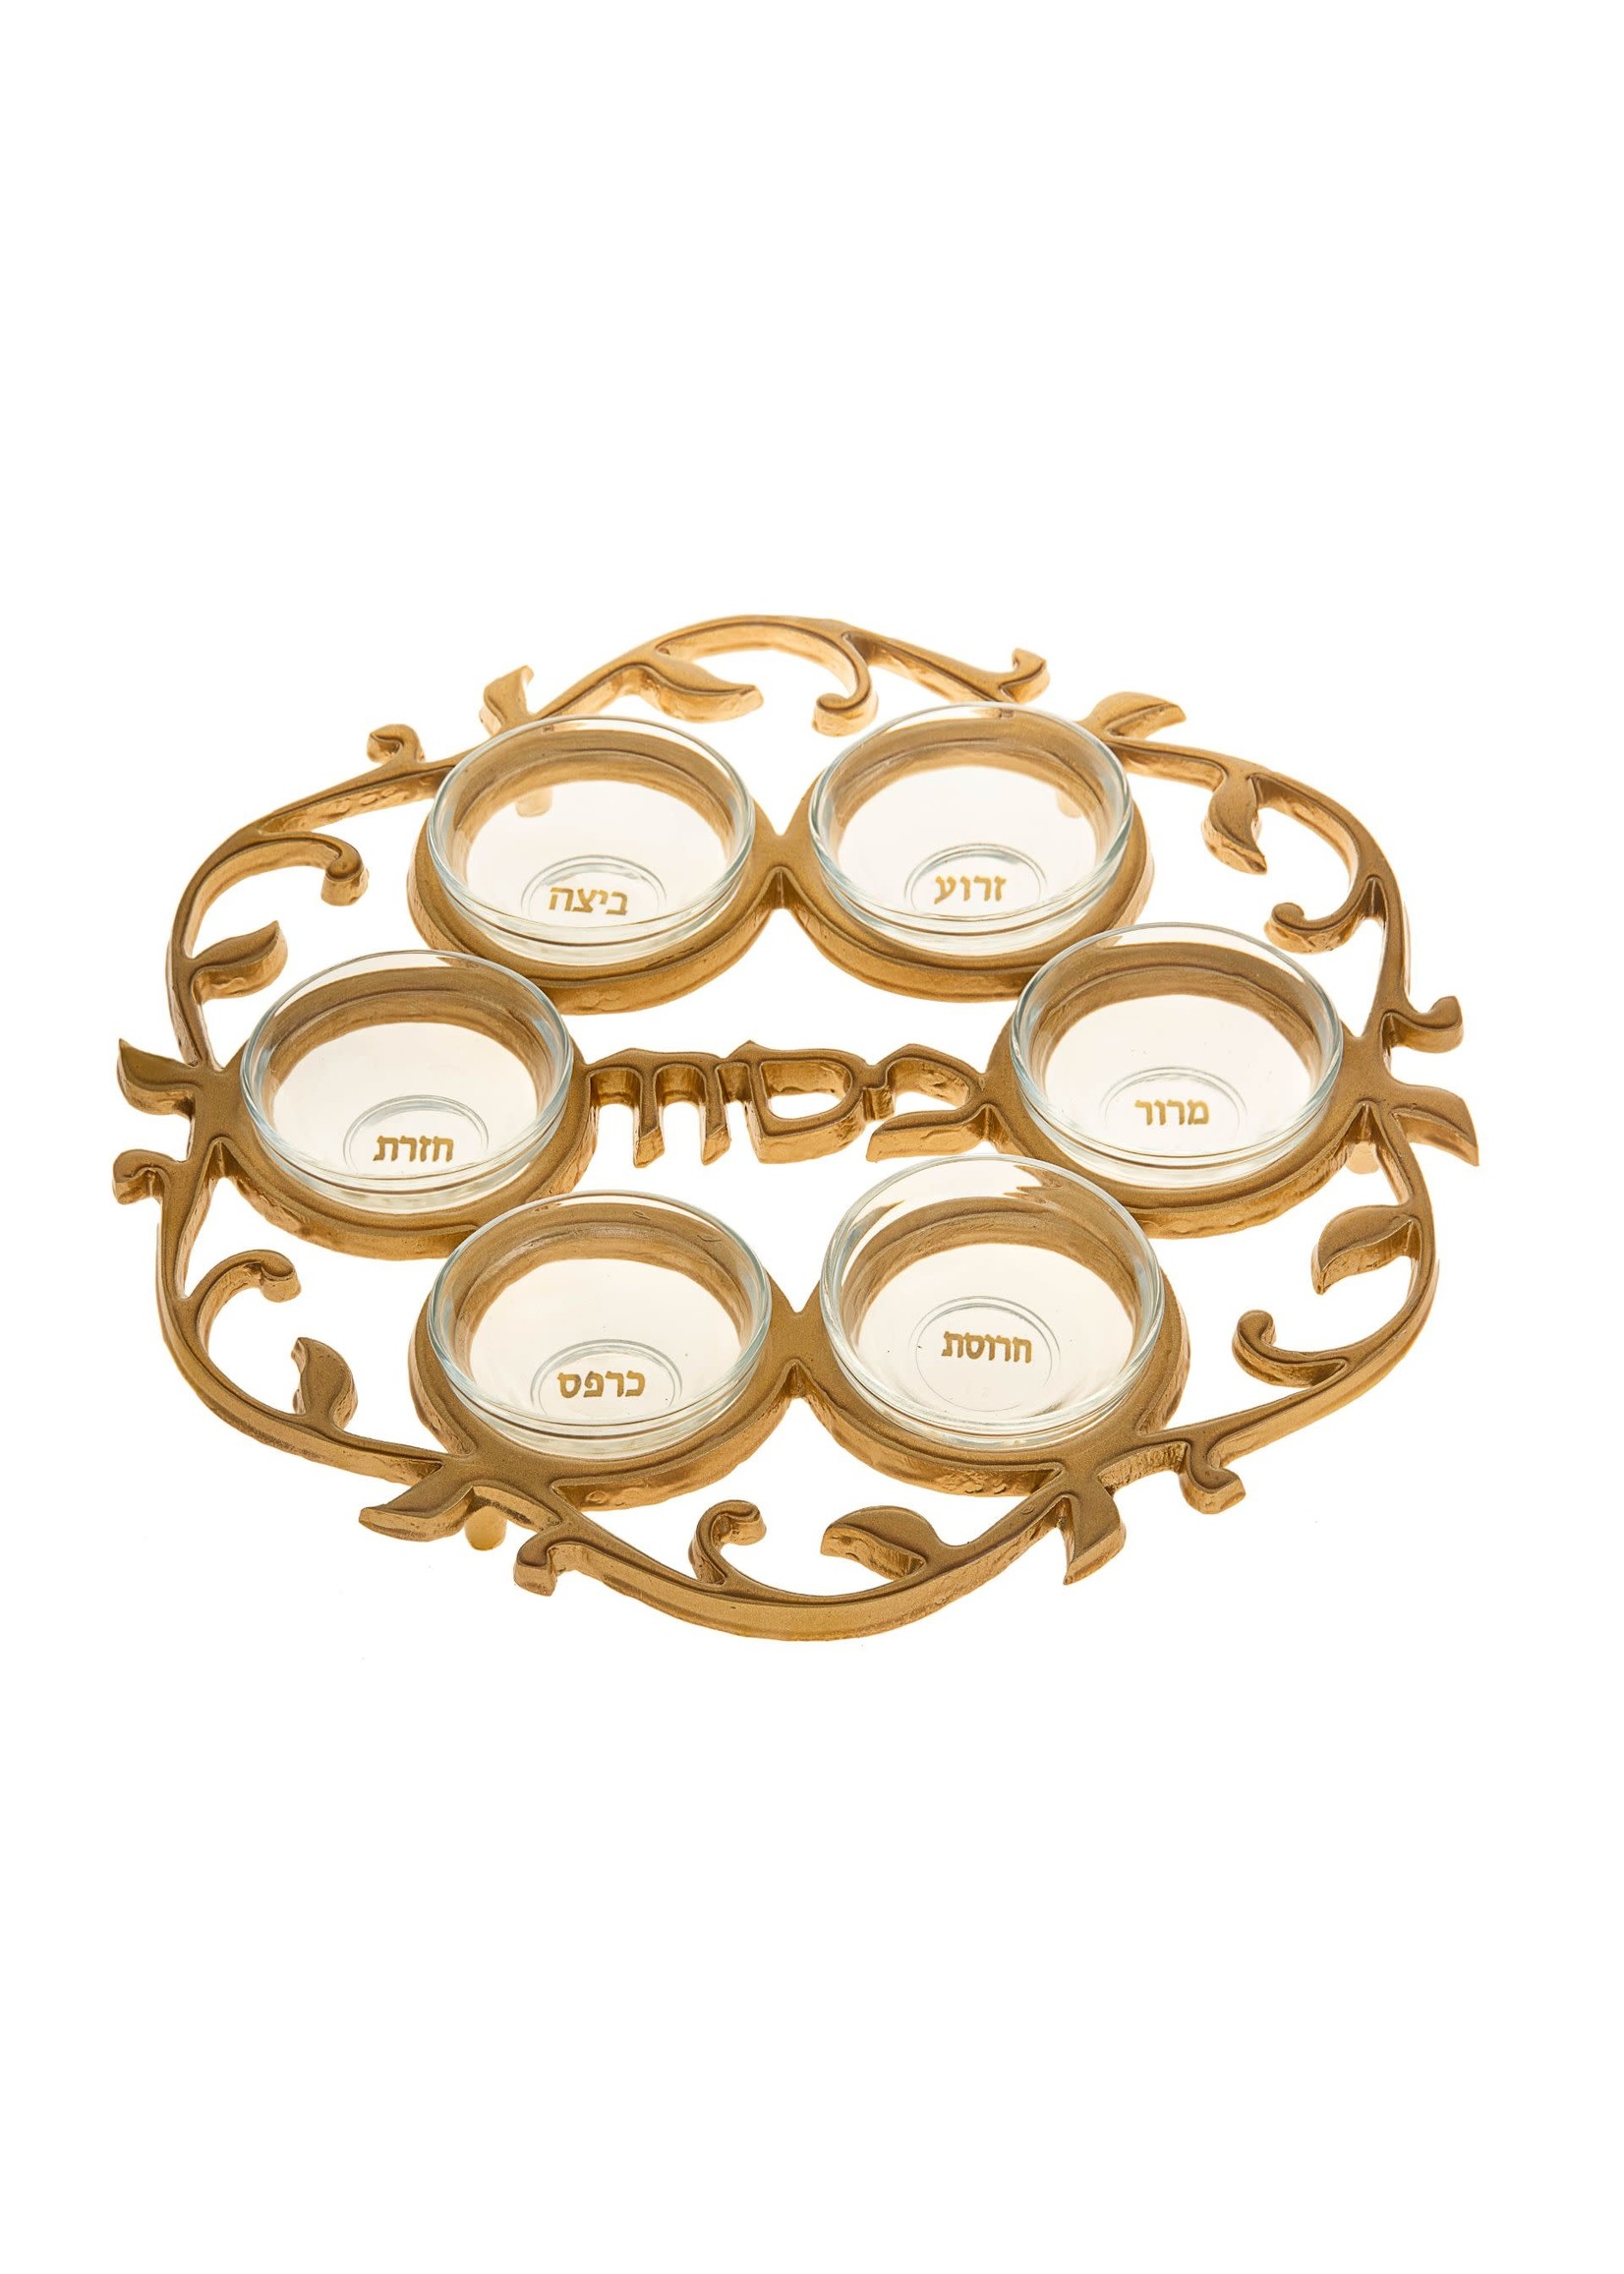 SEDER PLATE METAL FRAME WITH GLASS CUPS - GOLD